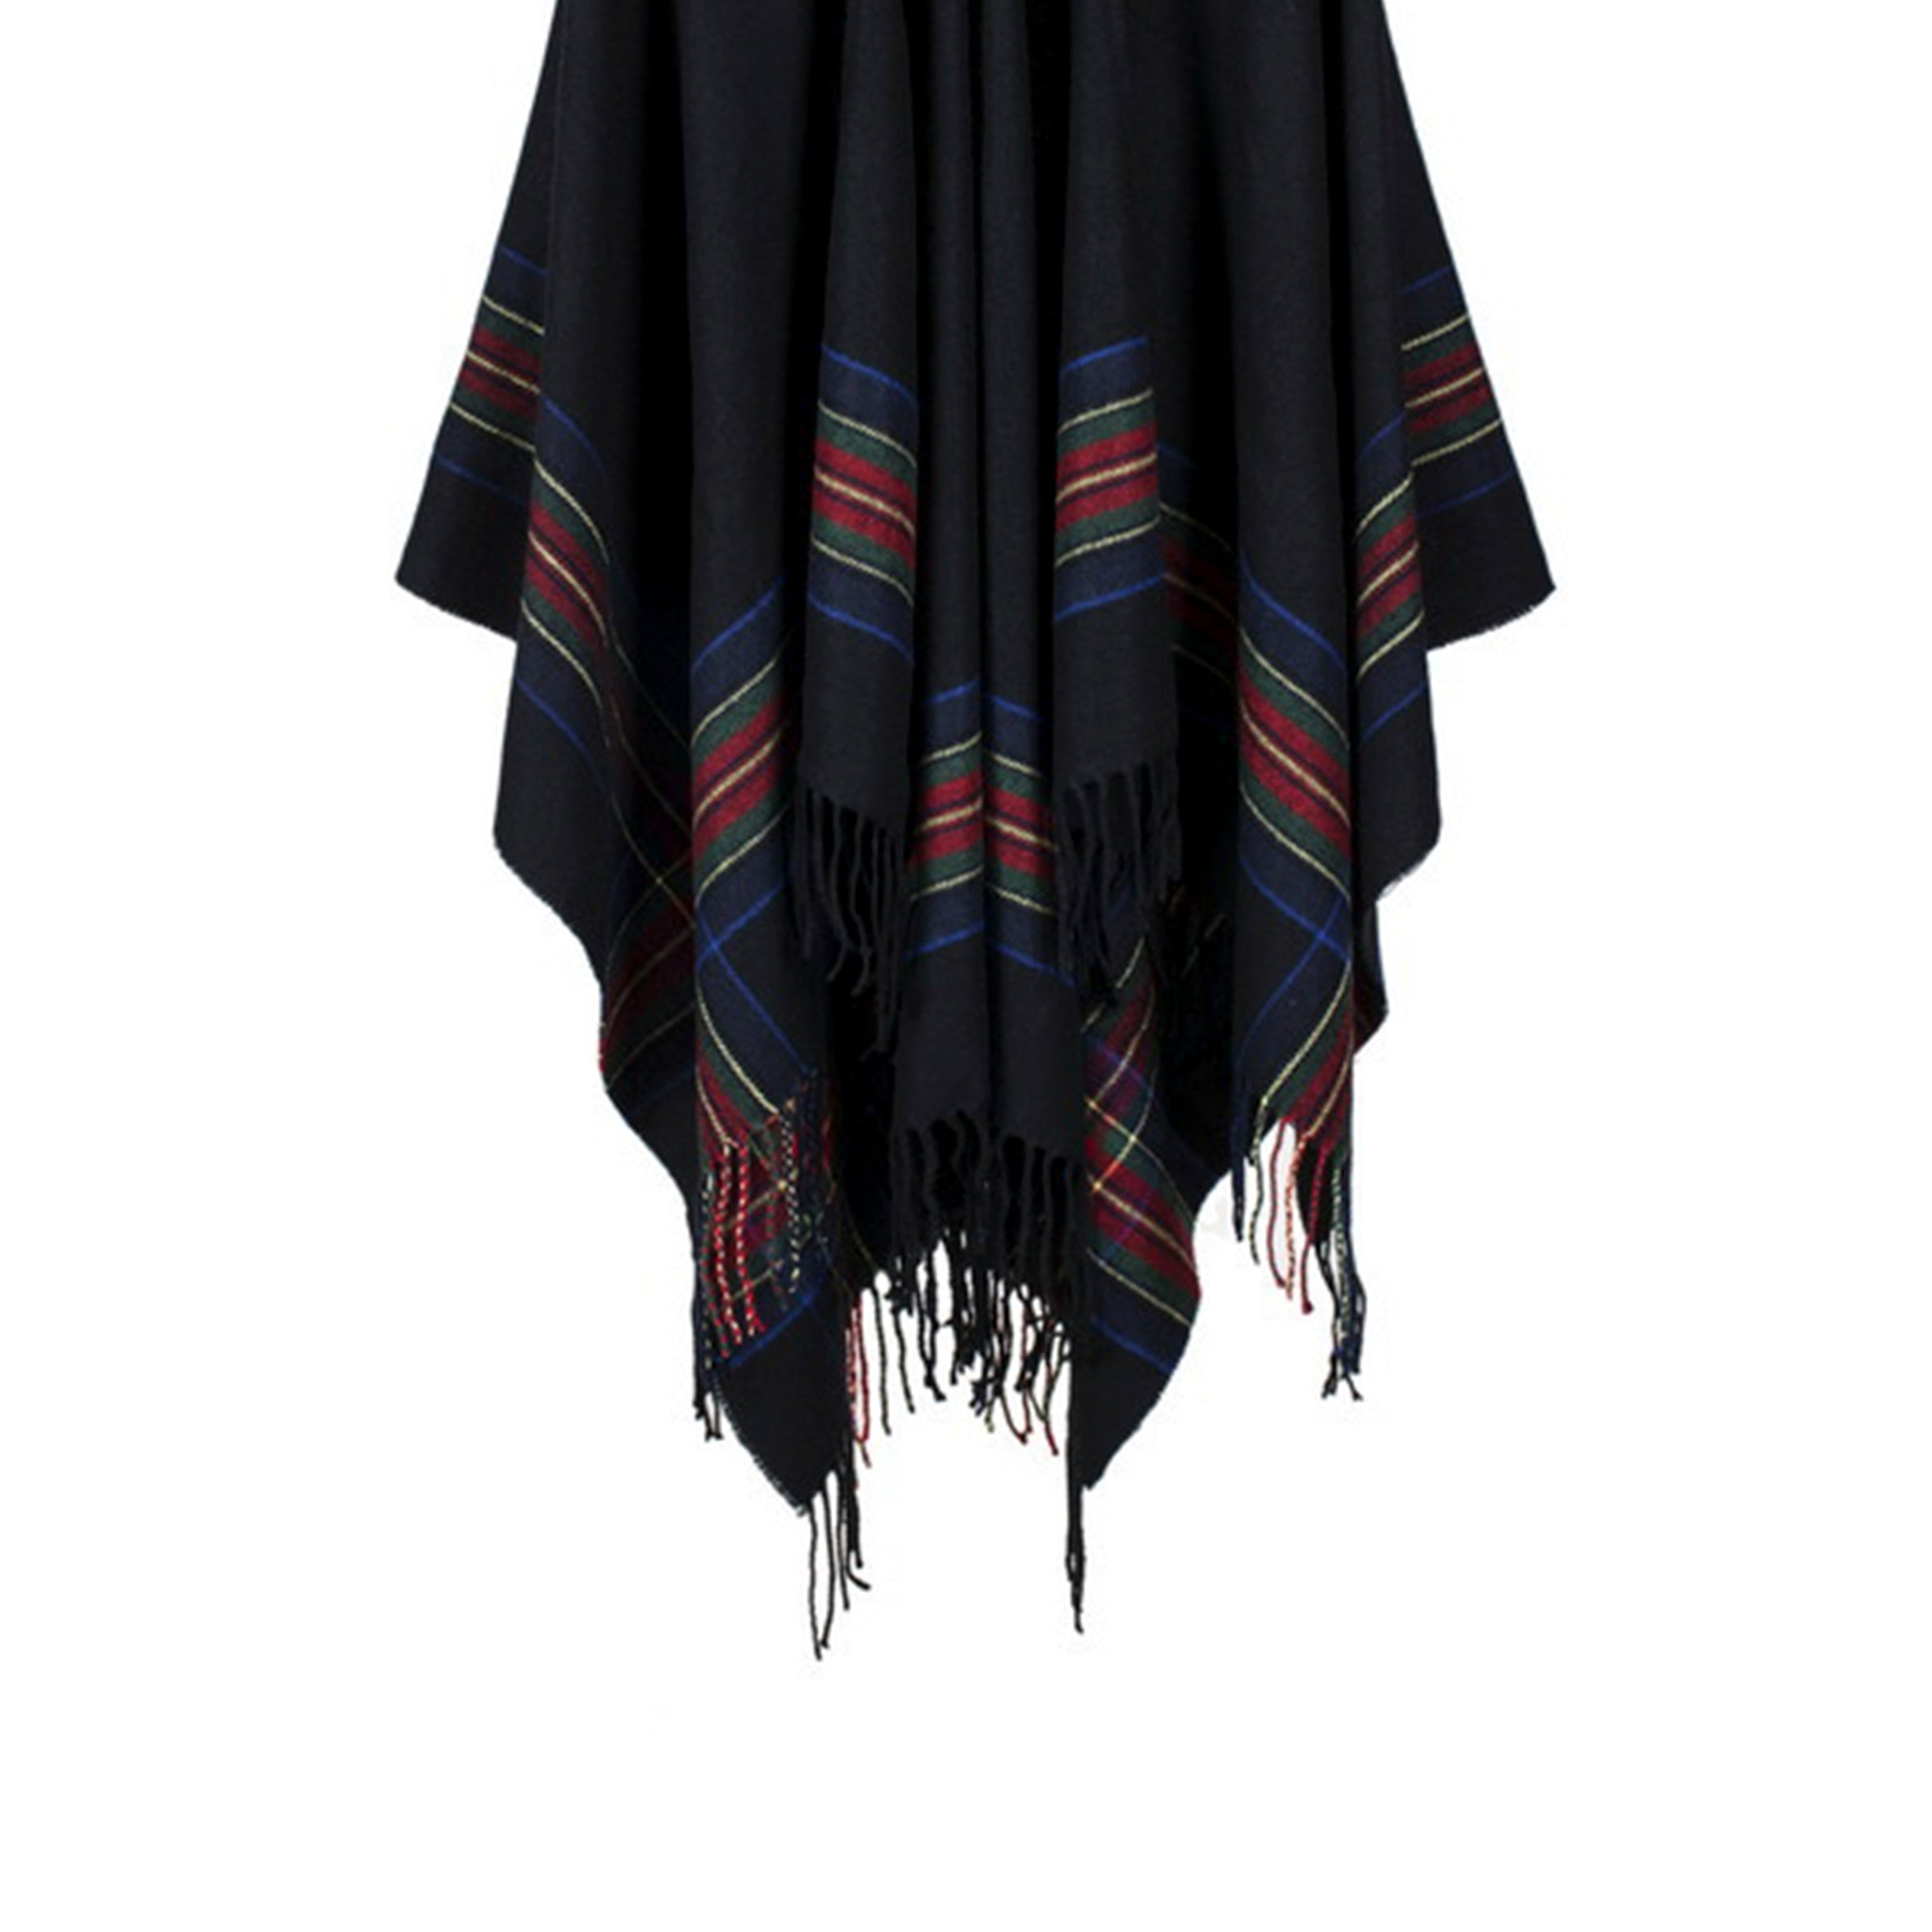 Striped Printed Cashmere Hooded Shawl S0193